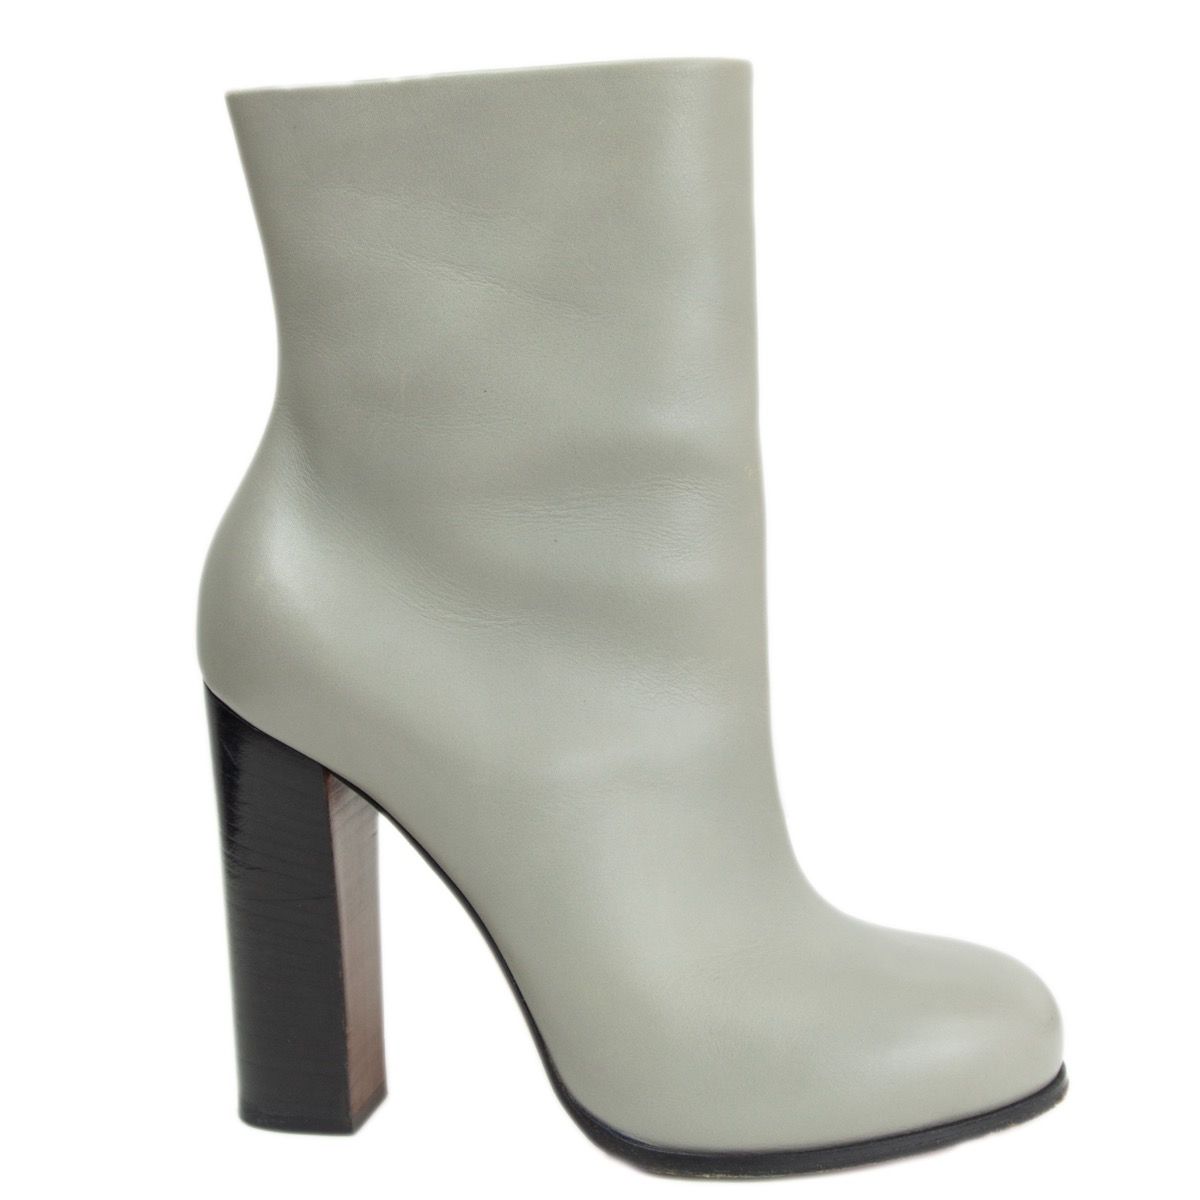 Céline Iconic Sole Round Toe Heel Ankle Boots Light Gray 37